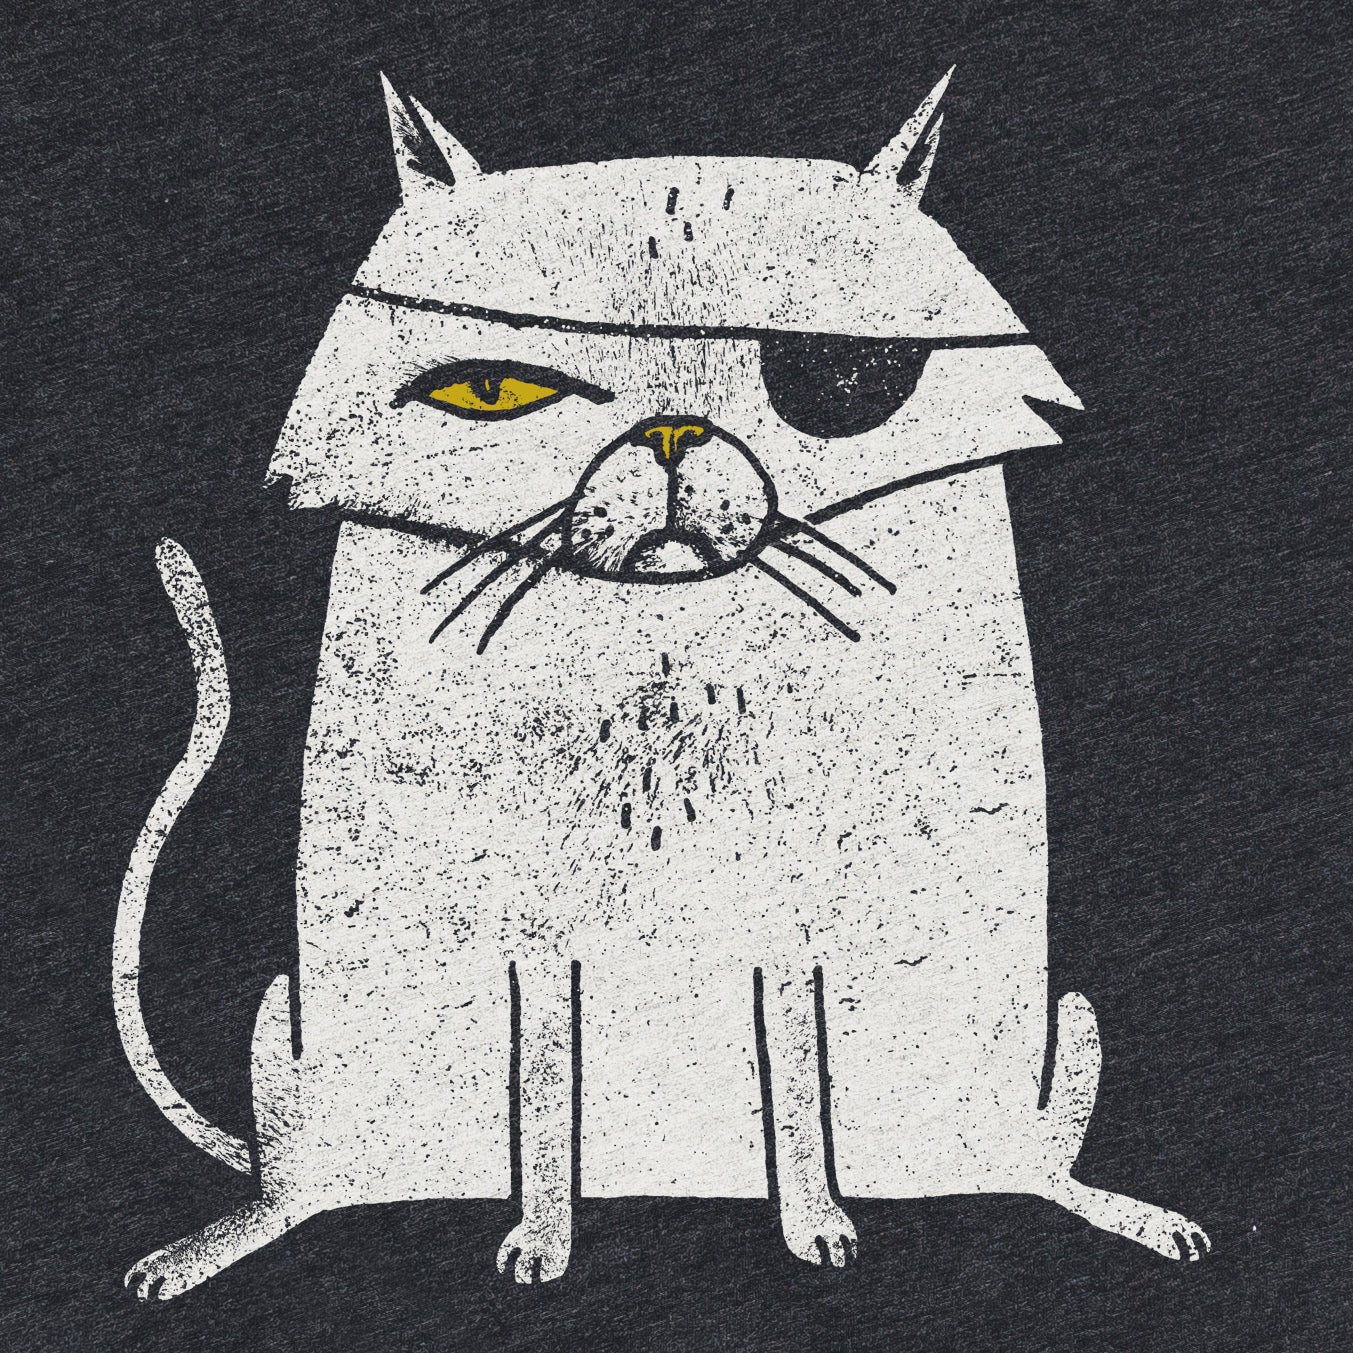 Detail of super soft gray black womens tshirt of a one eyed cat with an eyepatch. The cat looks like a pirate or an evil Bond villian. Factory 43 is a graphic design studio that makes art with a PNW vibe that reflects their Midwest/Southern roots. This cotton/polyester/rayon shirt printed in Seattle, Washington. The cat is white with a yellow eye and nose.